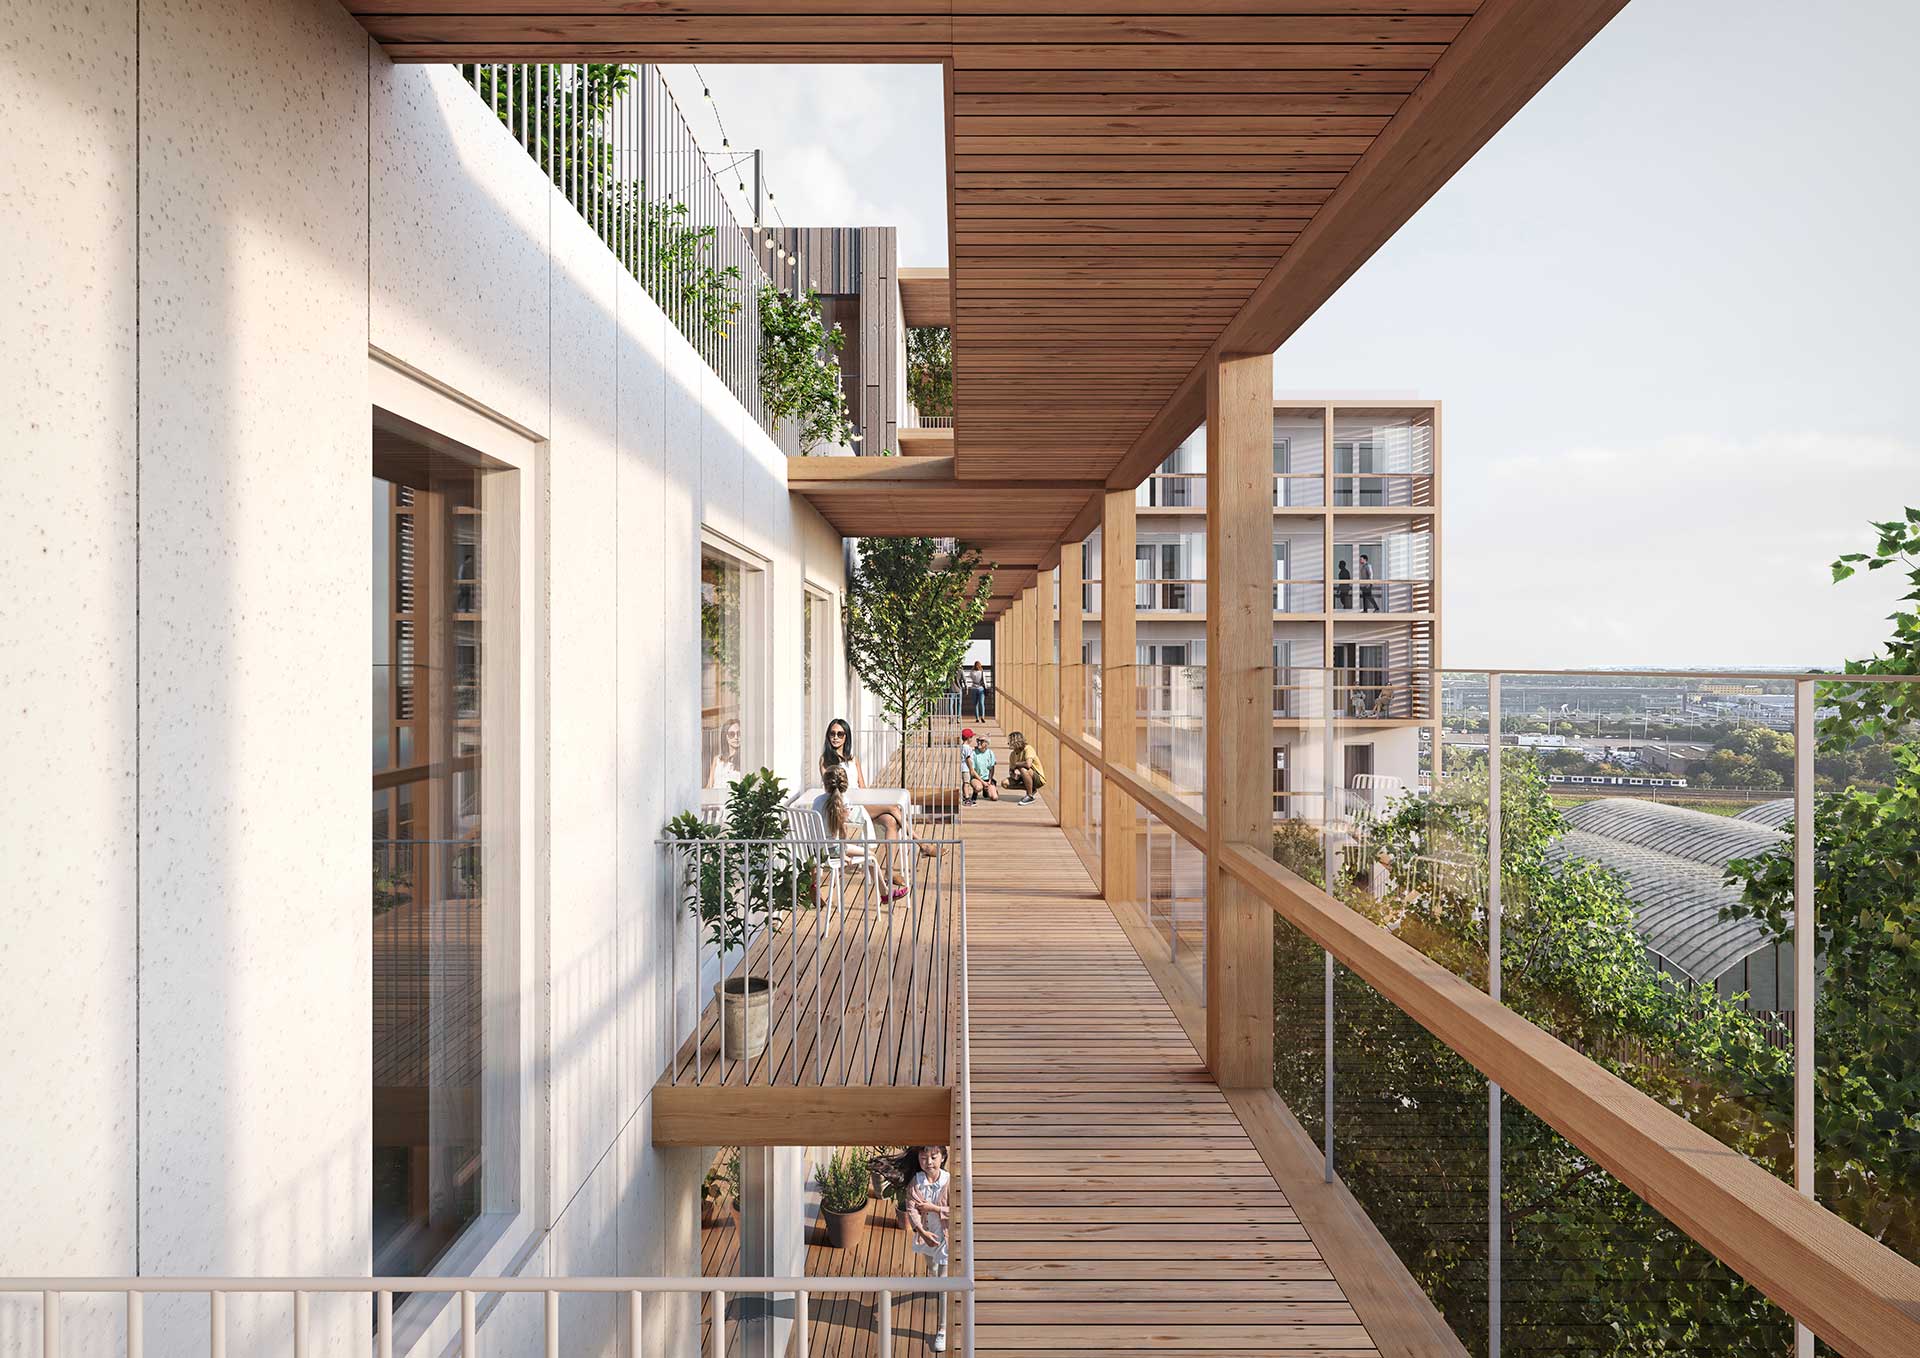 Timber multifamily apartment buildings